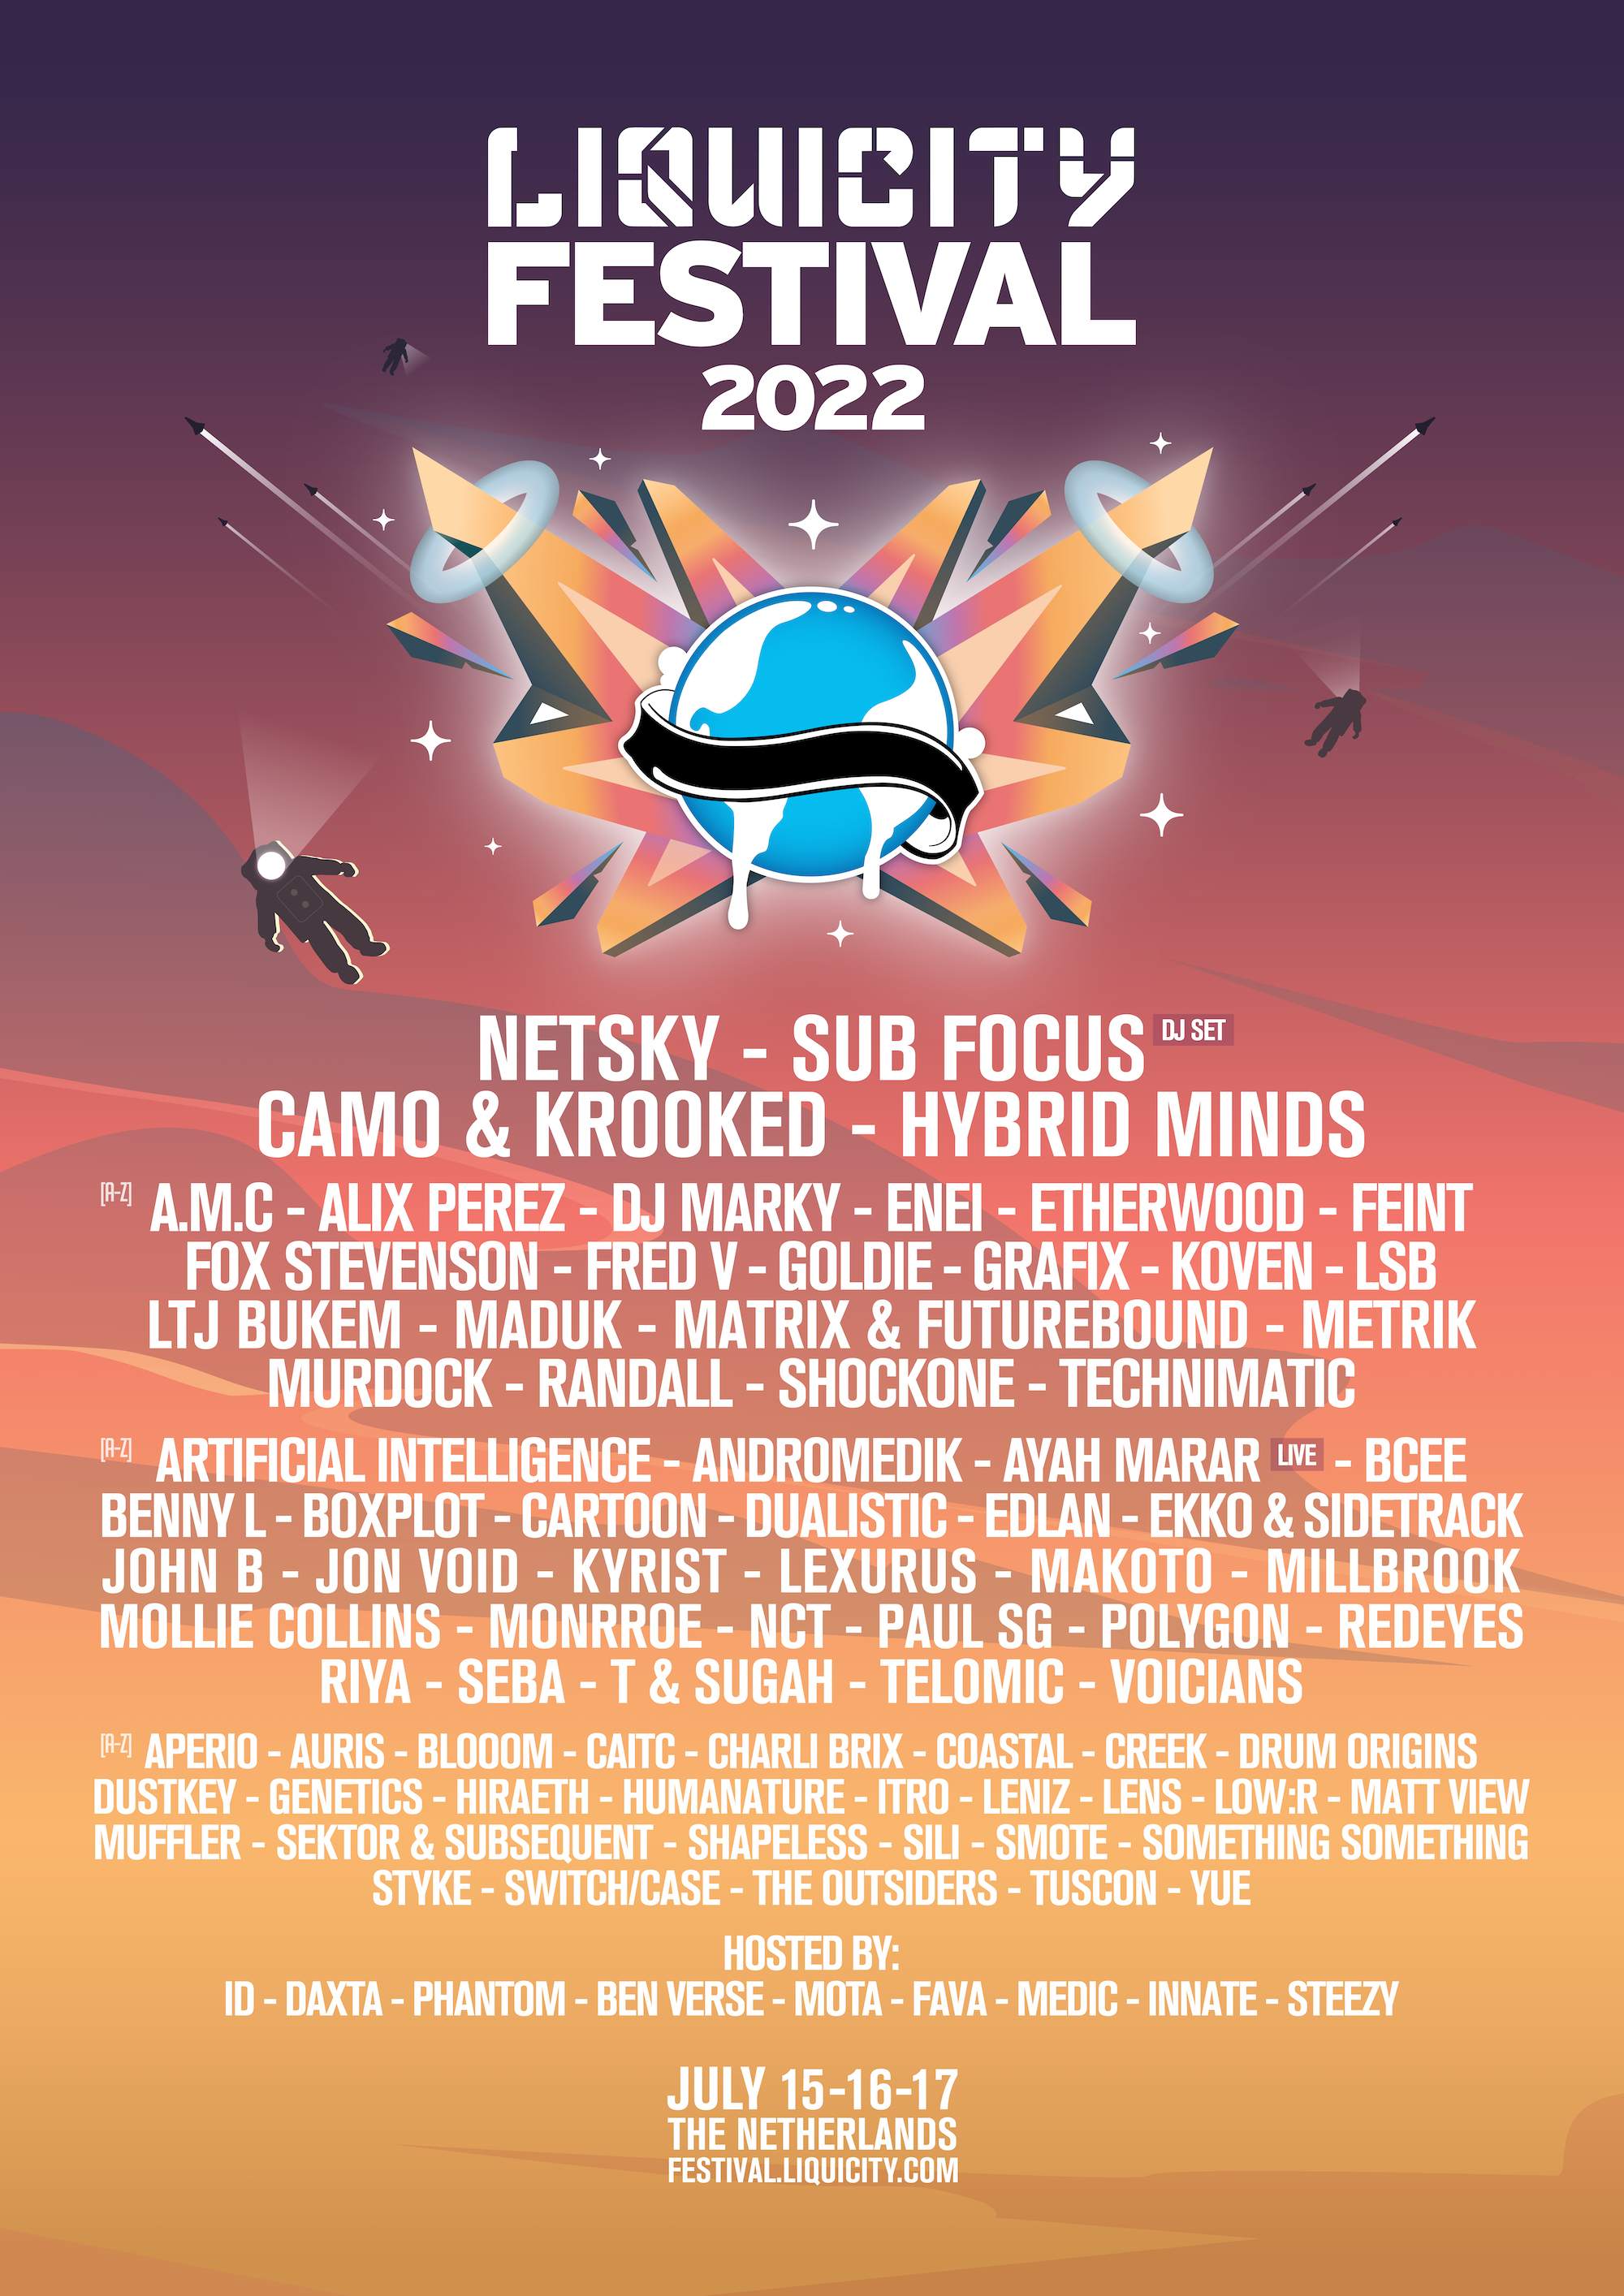 Liquicity Festival 2022 at Geestmerambacht, Other regions